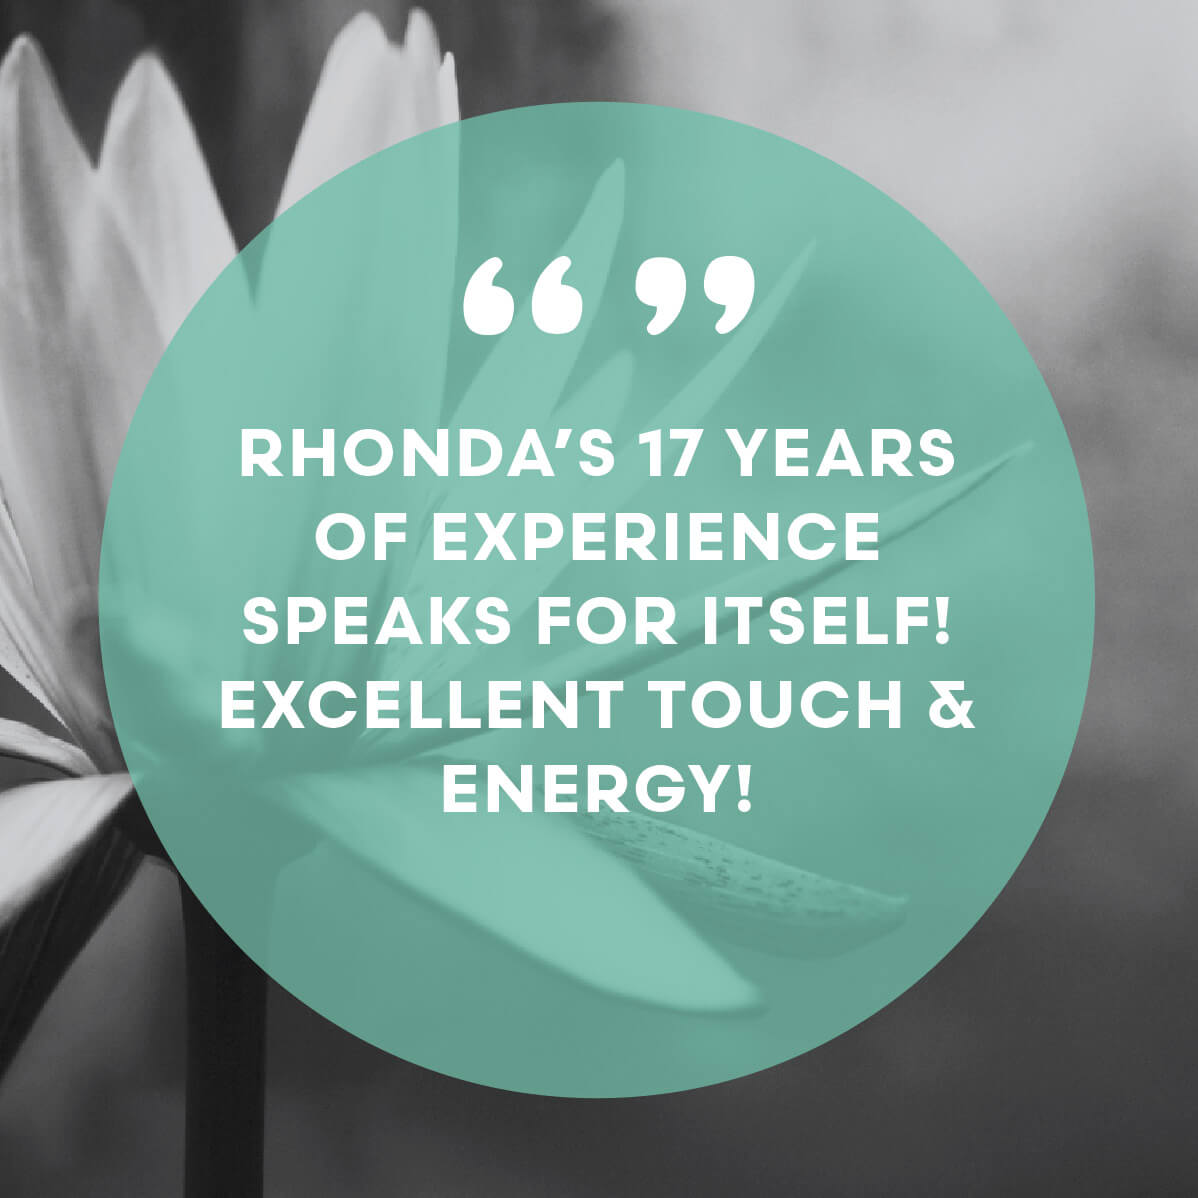 Rhonda's 17 years of experience speaks for itself! Excellent touch & energy!